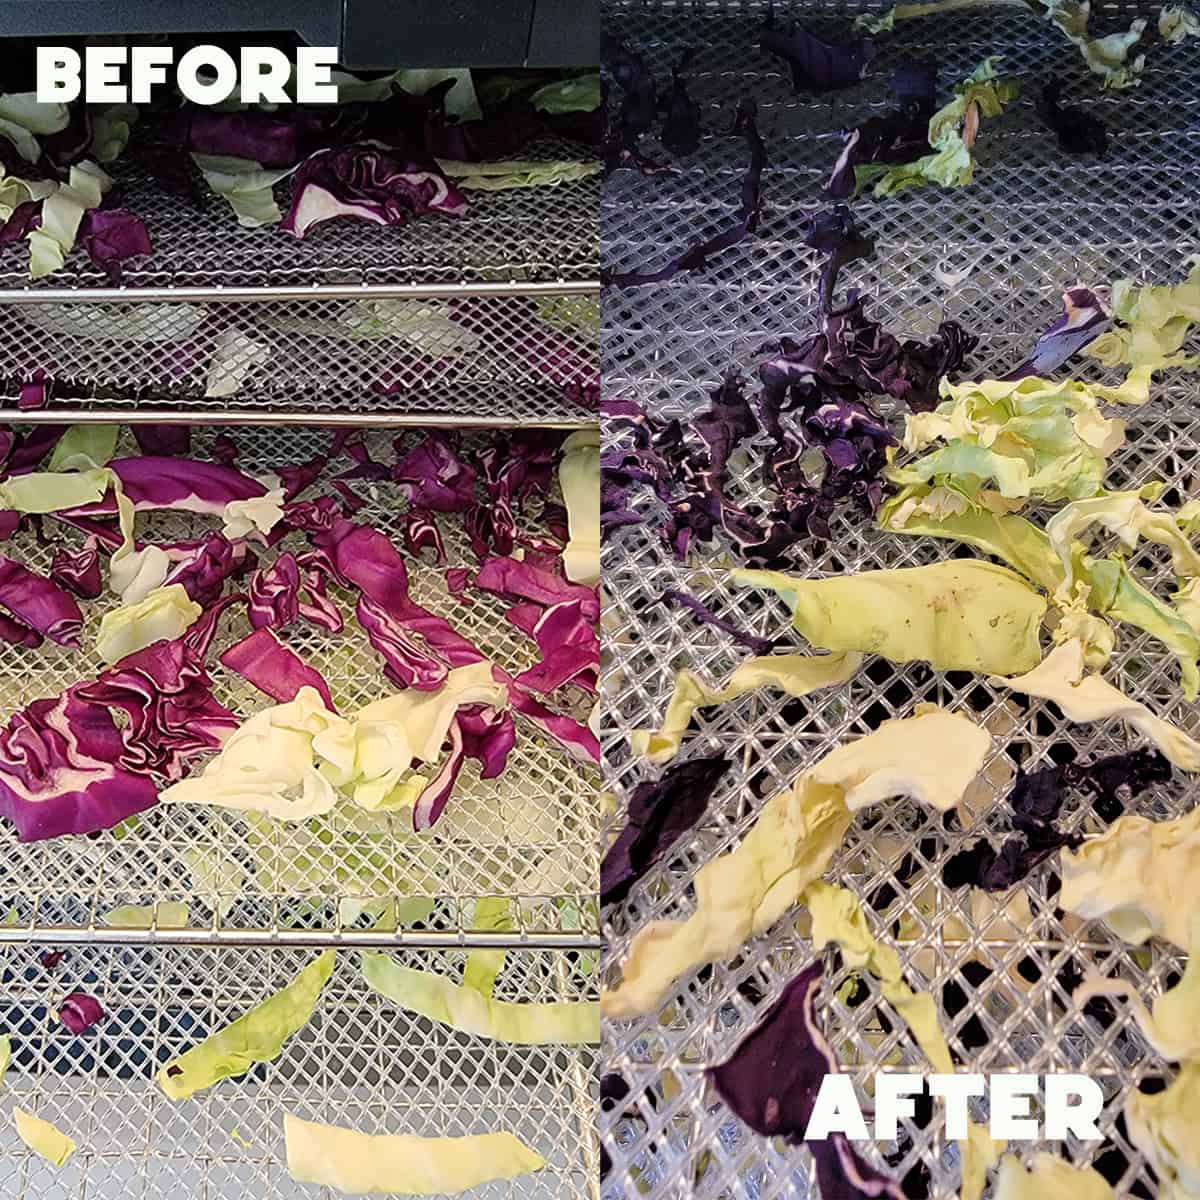 Before and after image of drying cabbage in a Sahara Dehydrator